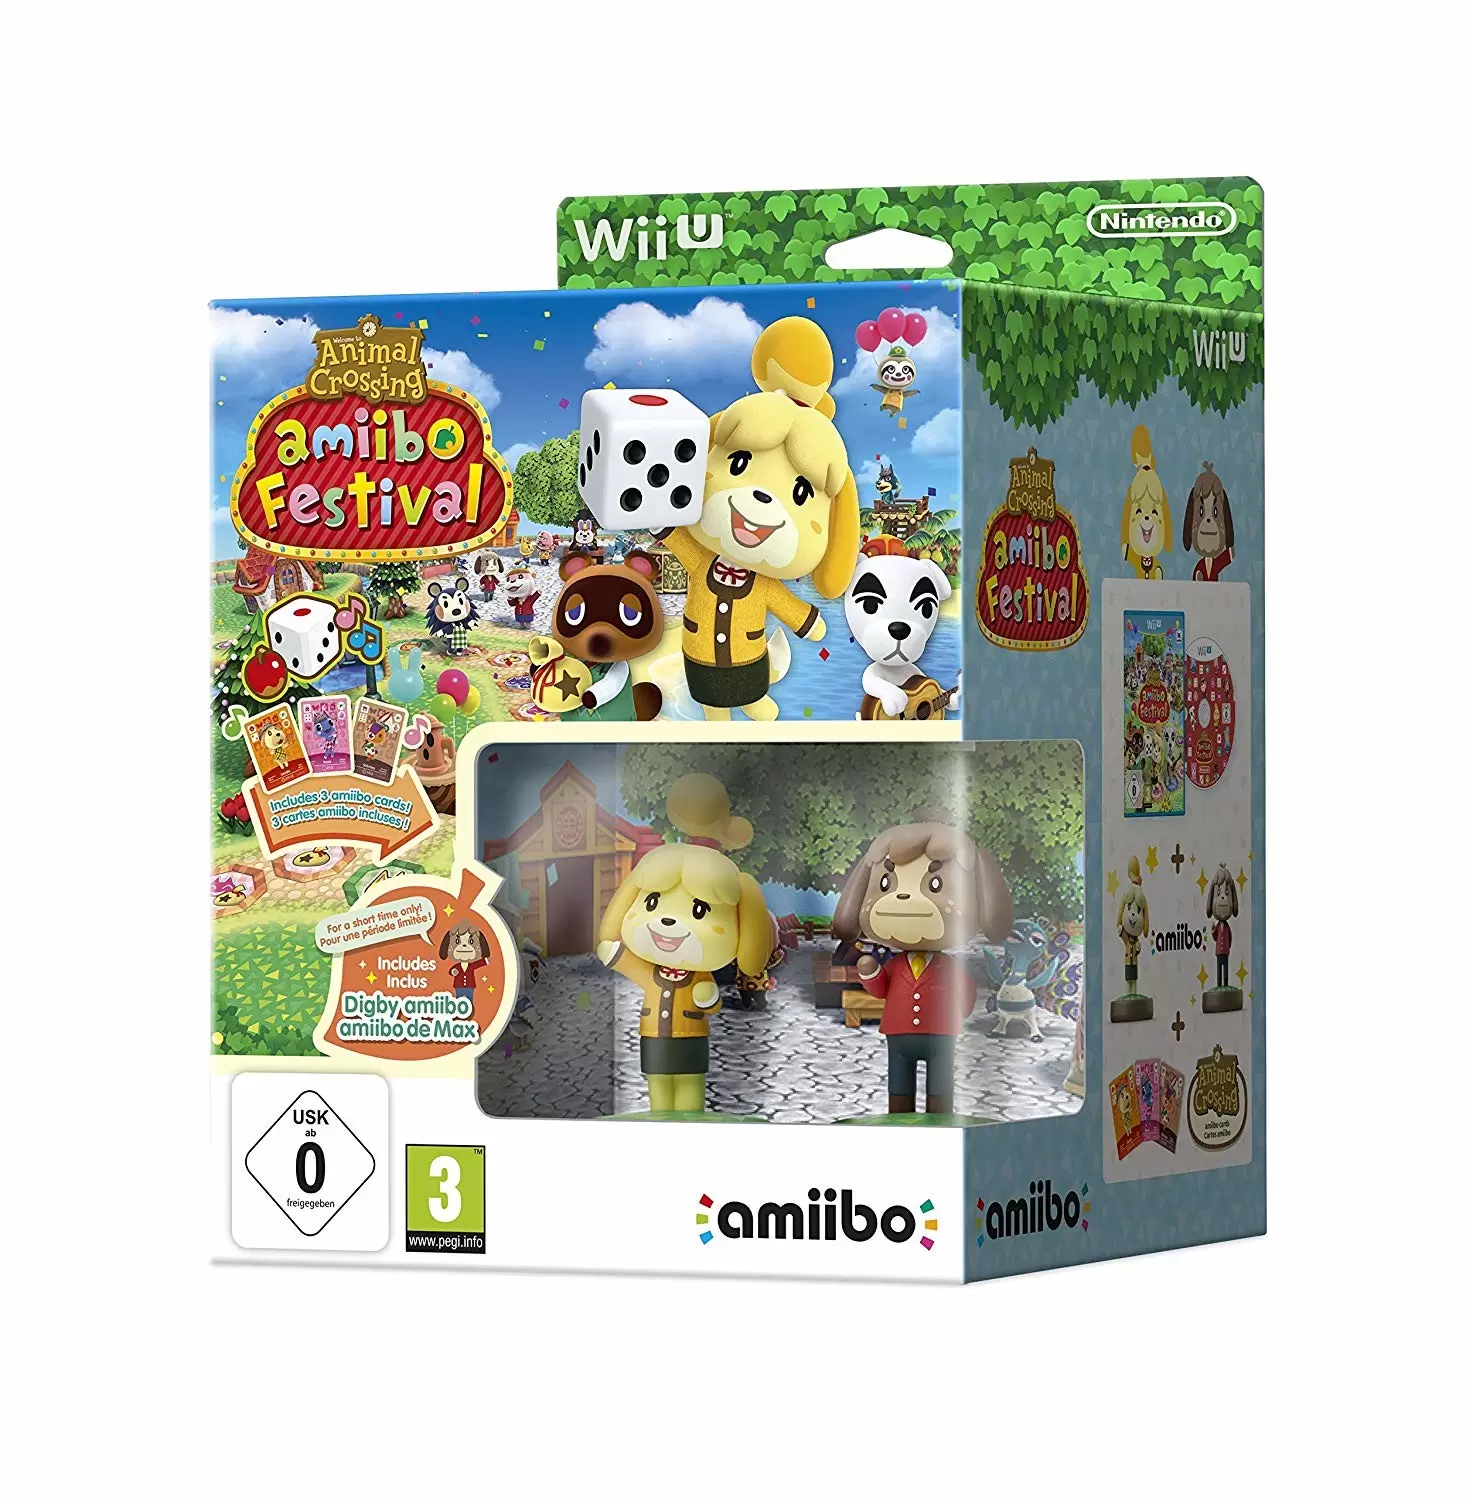 Wii U Games - Animal Crossing amiibo Festival (Special Pack)